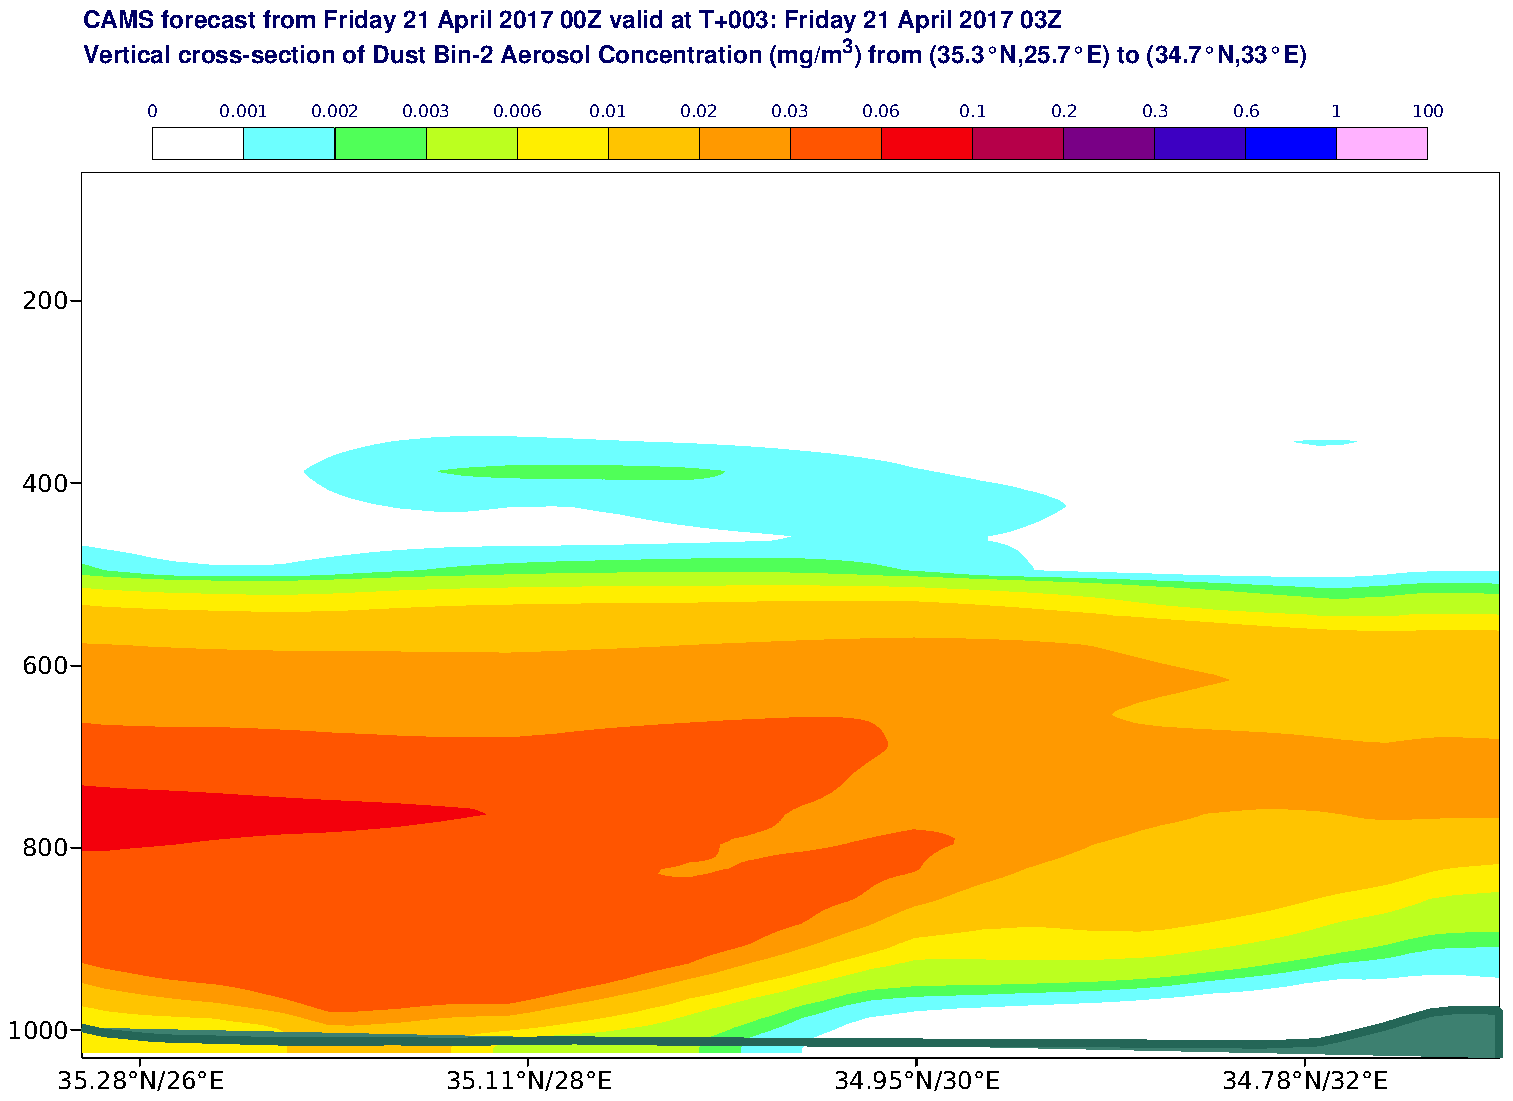 Vertical cross-section of Dust Bin-2 Aerosol Concentration (mg/m3) valid at T3 - 2017-04-21 03:00